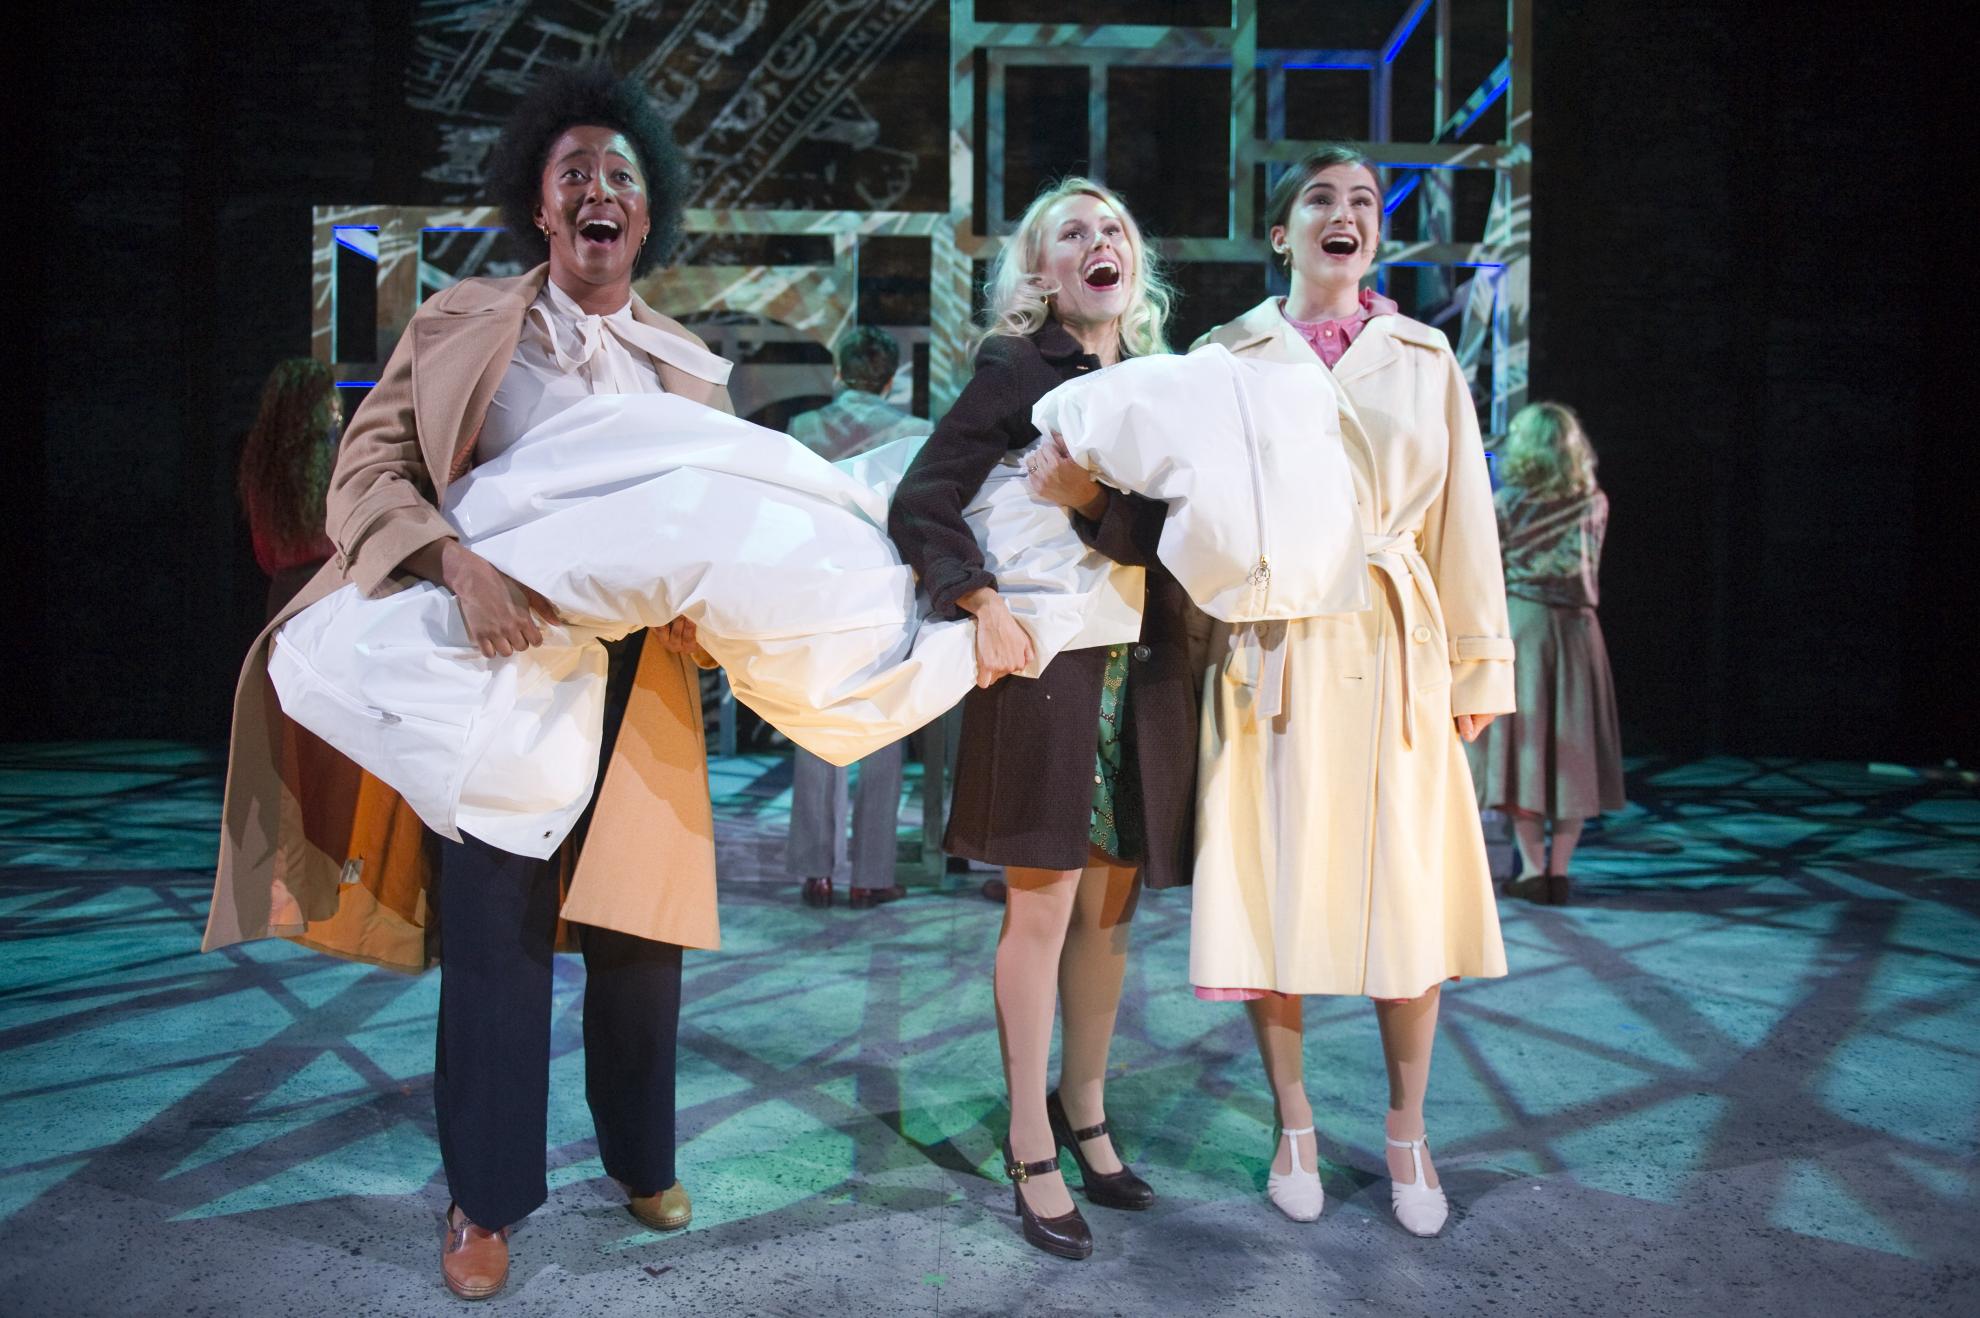 9 to 5 the Musical 